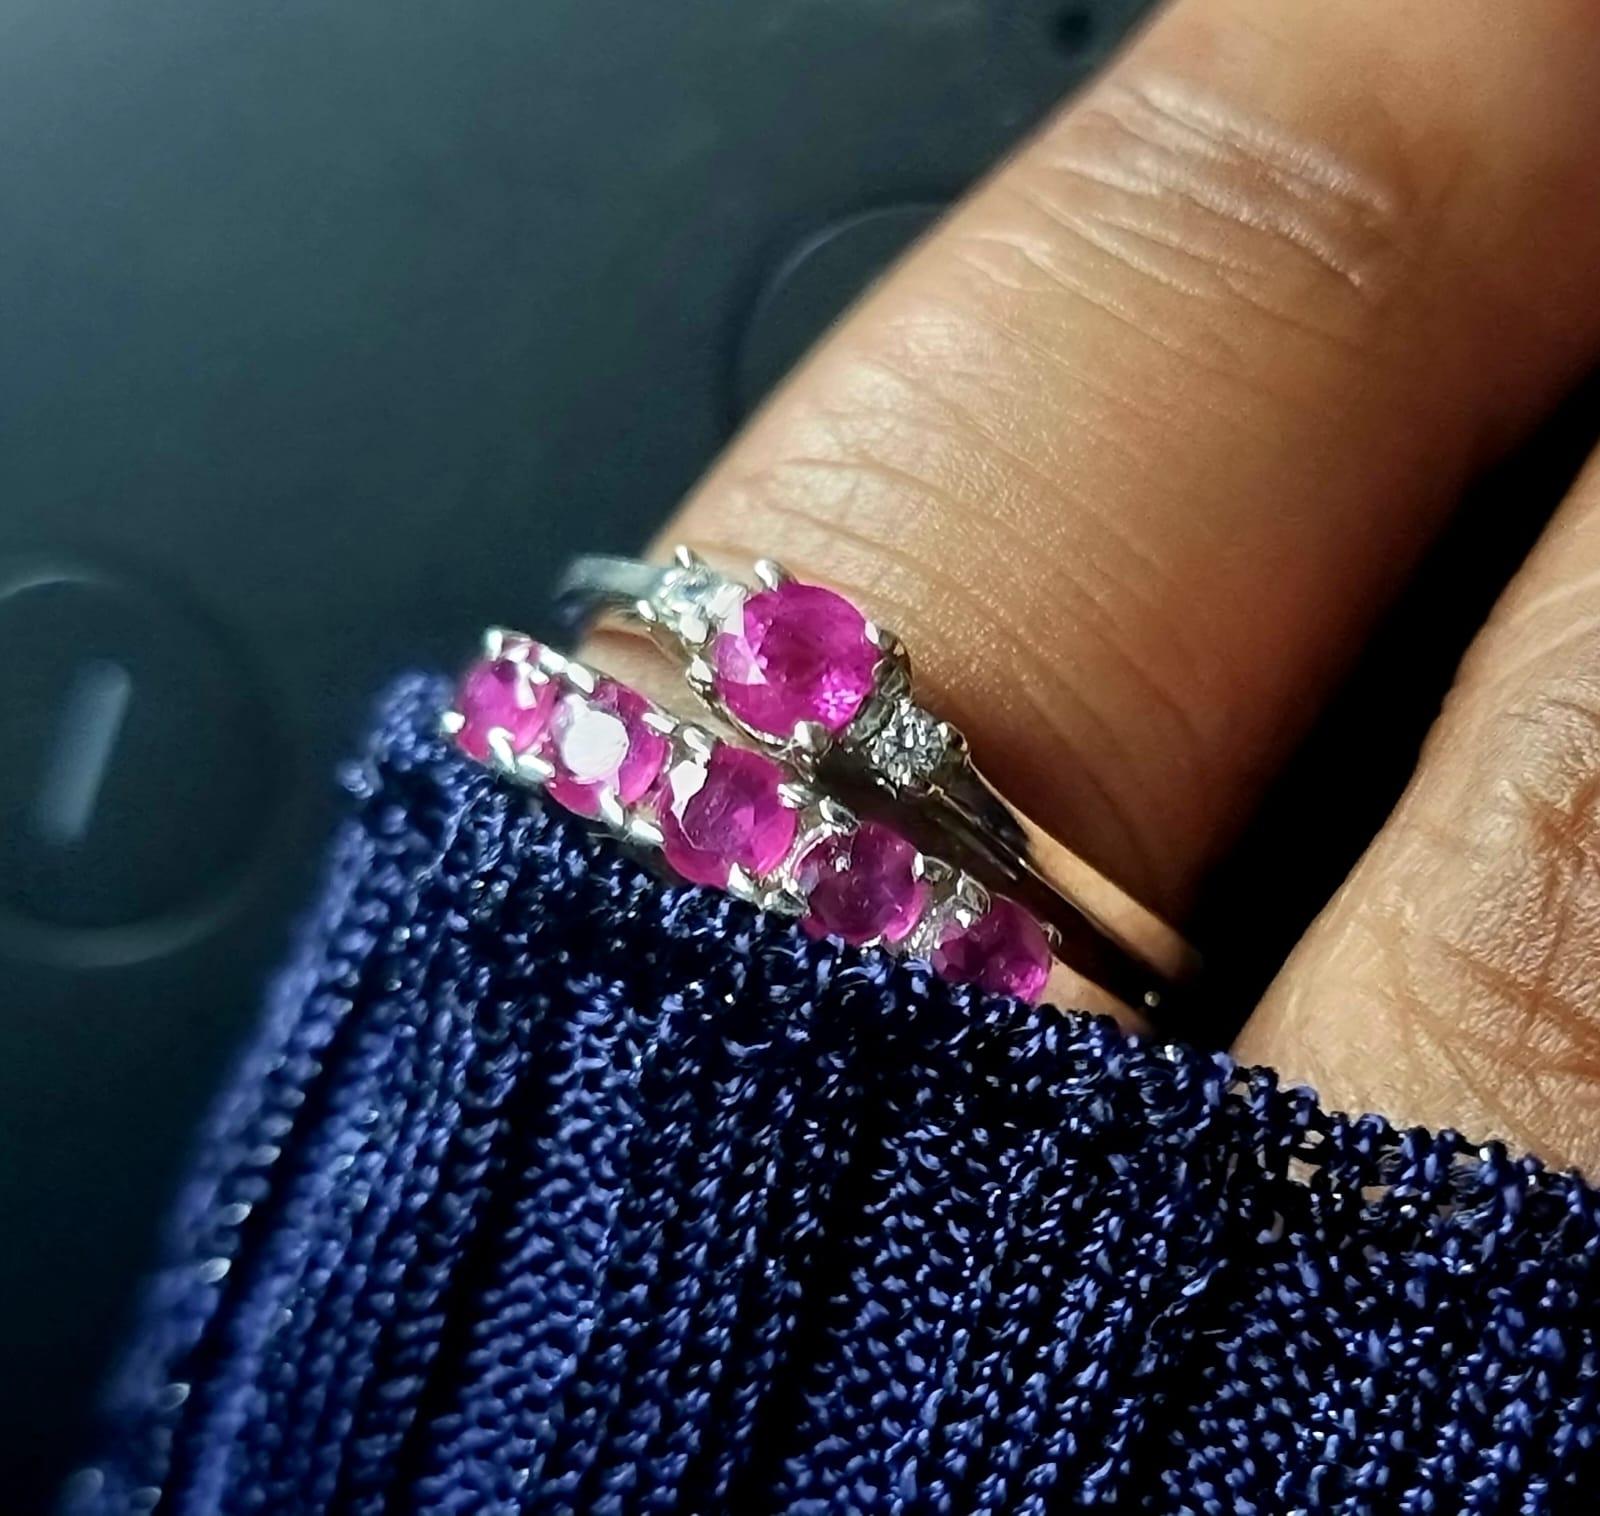 Introducing our 1.25CTW Round Pink Sapphire Platinum Silver Band Ring, a stunning piece that exudes elegance and sophistication. This ring features a mesmerizing 5X .25ct Round Pink Sapphire at its center, known for its captivating pink hue and